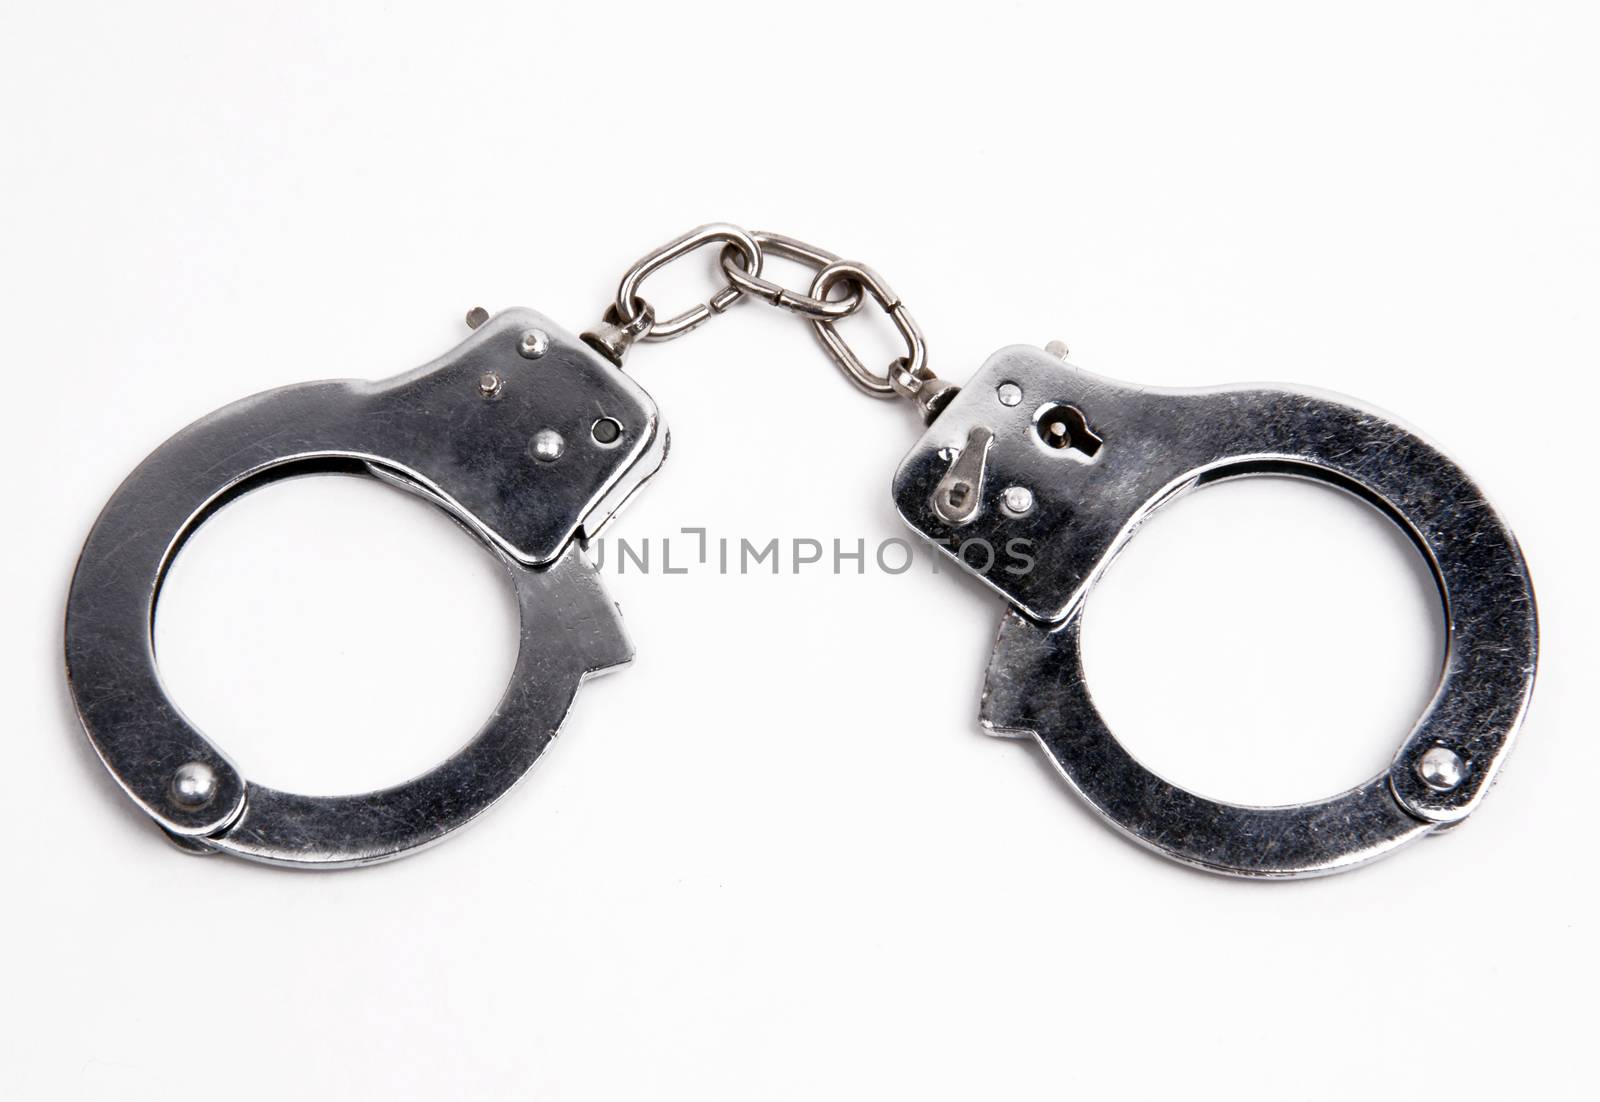 Law Enforcement Handcuffs Wrist Restraints on White Background by ChrisBoswell